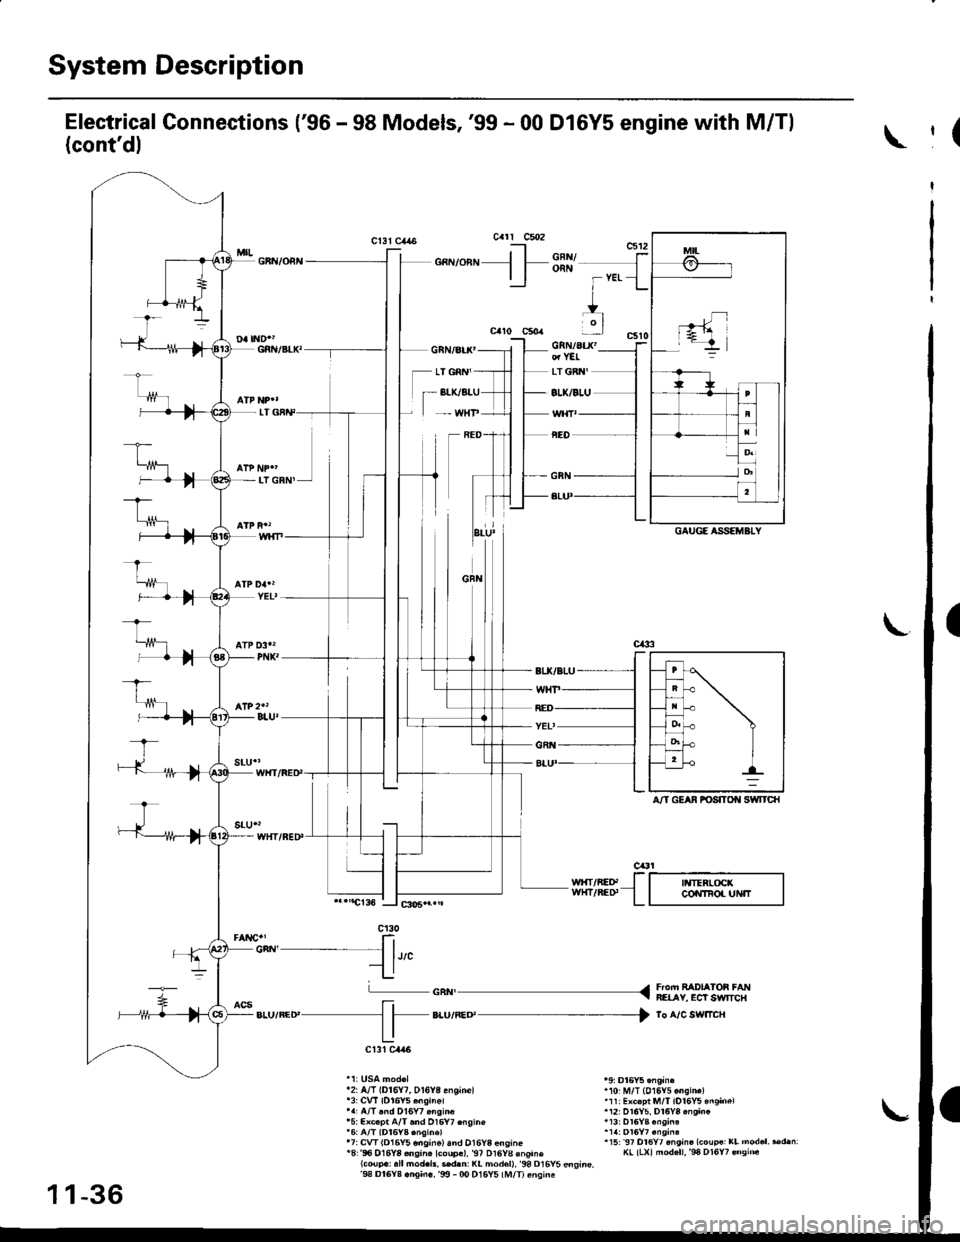 HONDA CIVIC 1998 6.G User Guide System Description
Electrical Connections (96 - 98 Models,99 - 00 Dl6Y5 engine with M/Tl
(contdl
GA|l/OfiN
Cl3i C,ta6cart c5o2t--l c5t2
o",.uonr. l FSIX {| | FYEI l
g
.lc5t0GRN/aaX: rdYEr. ILrGiN